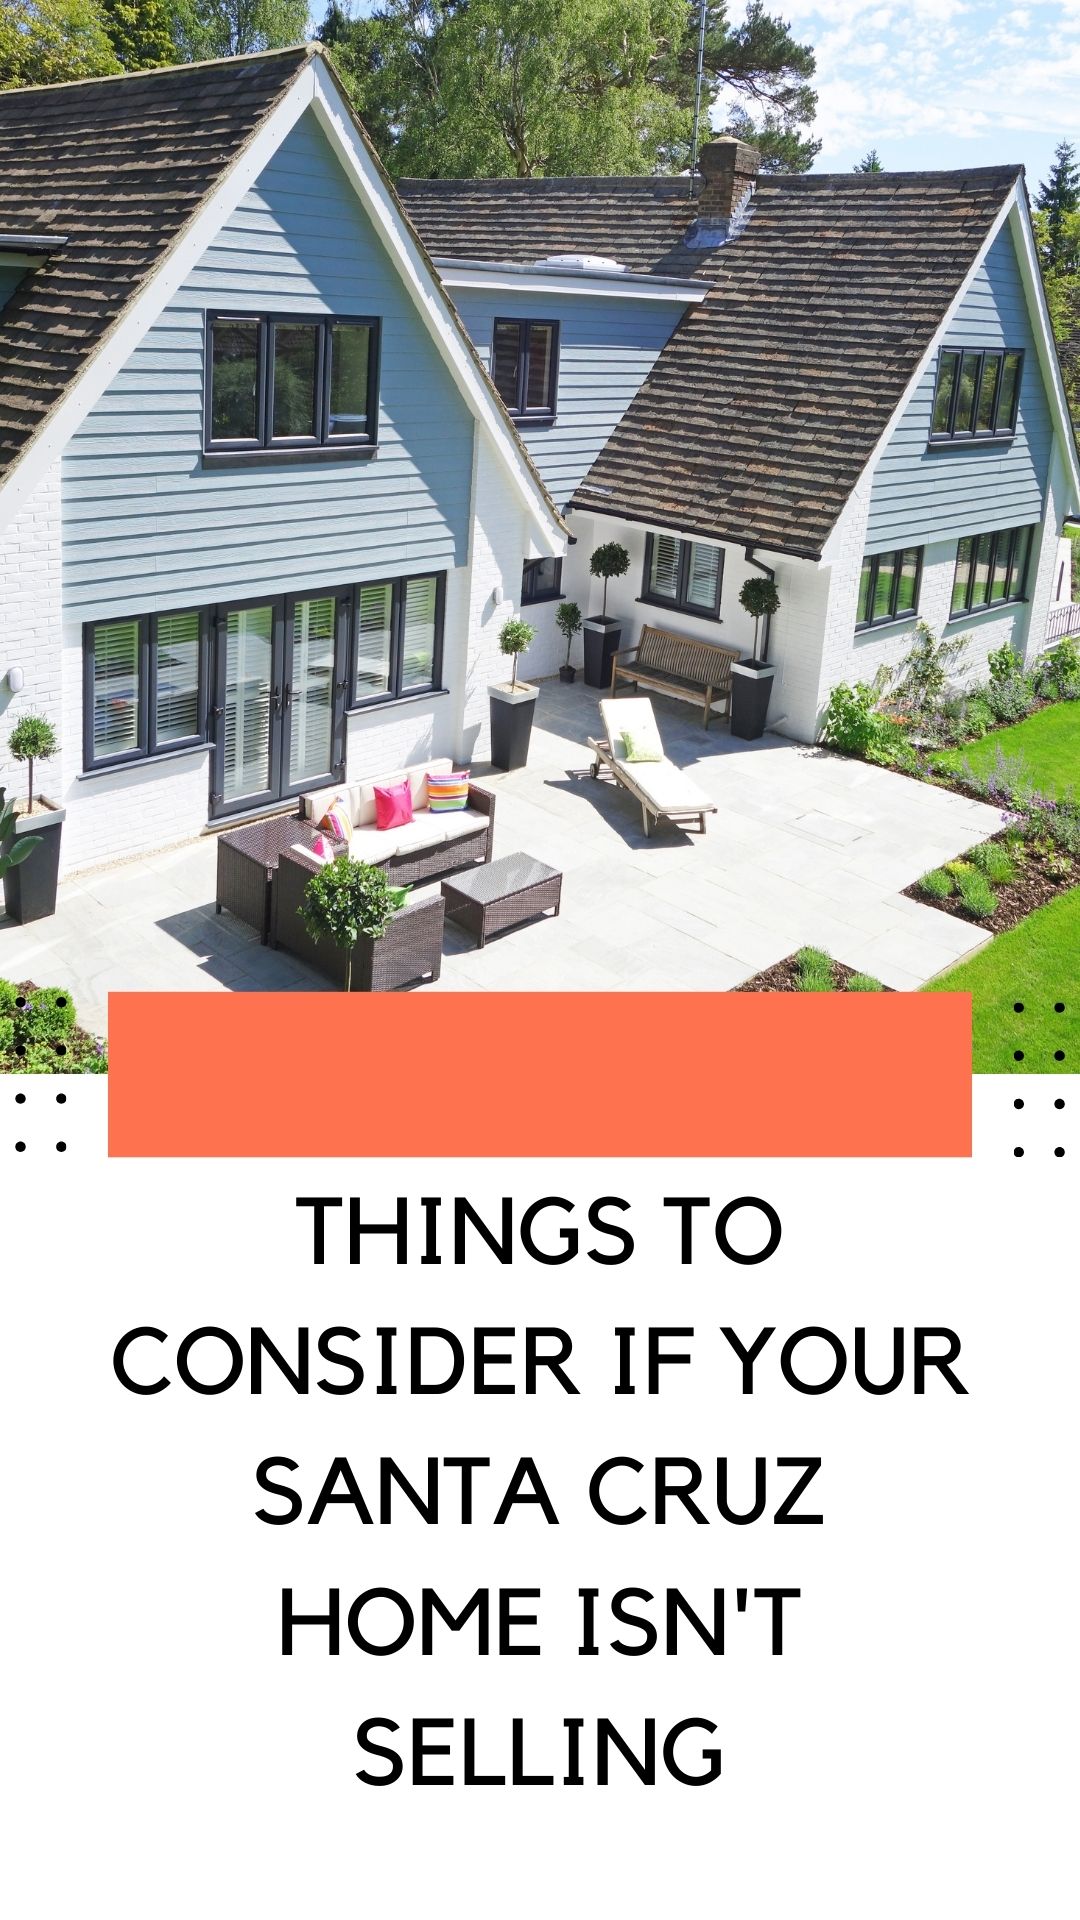 Things to Consider if Your Santa Cruz Home Isn't Selling